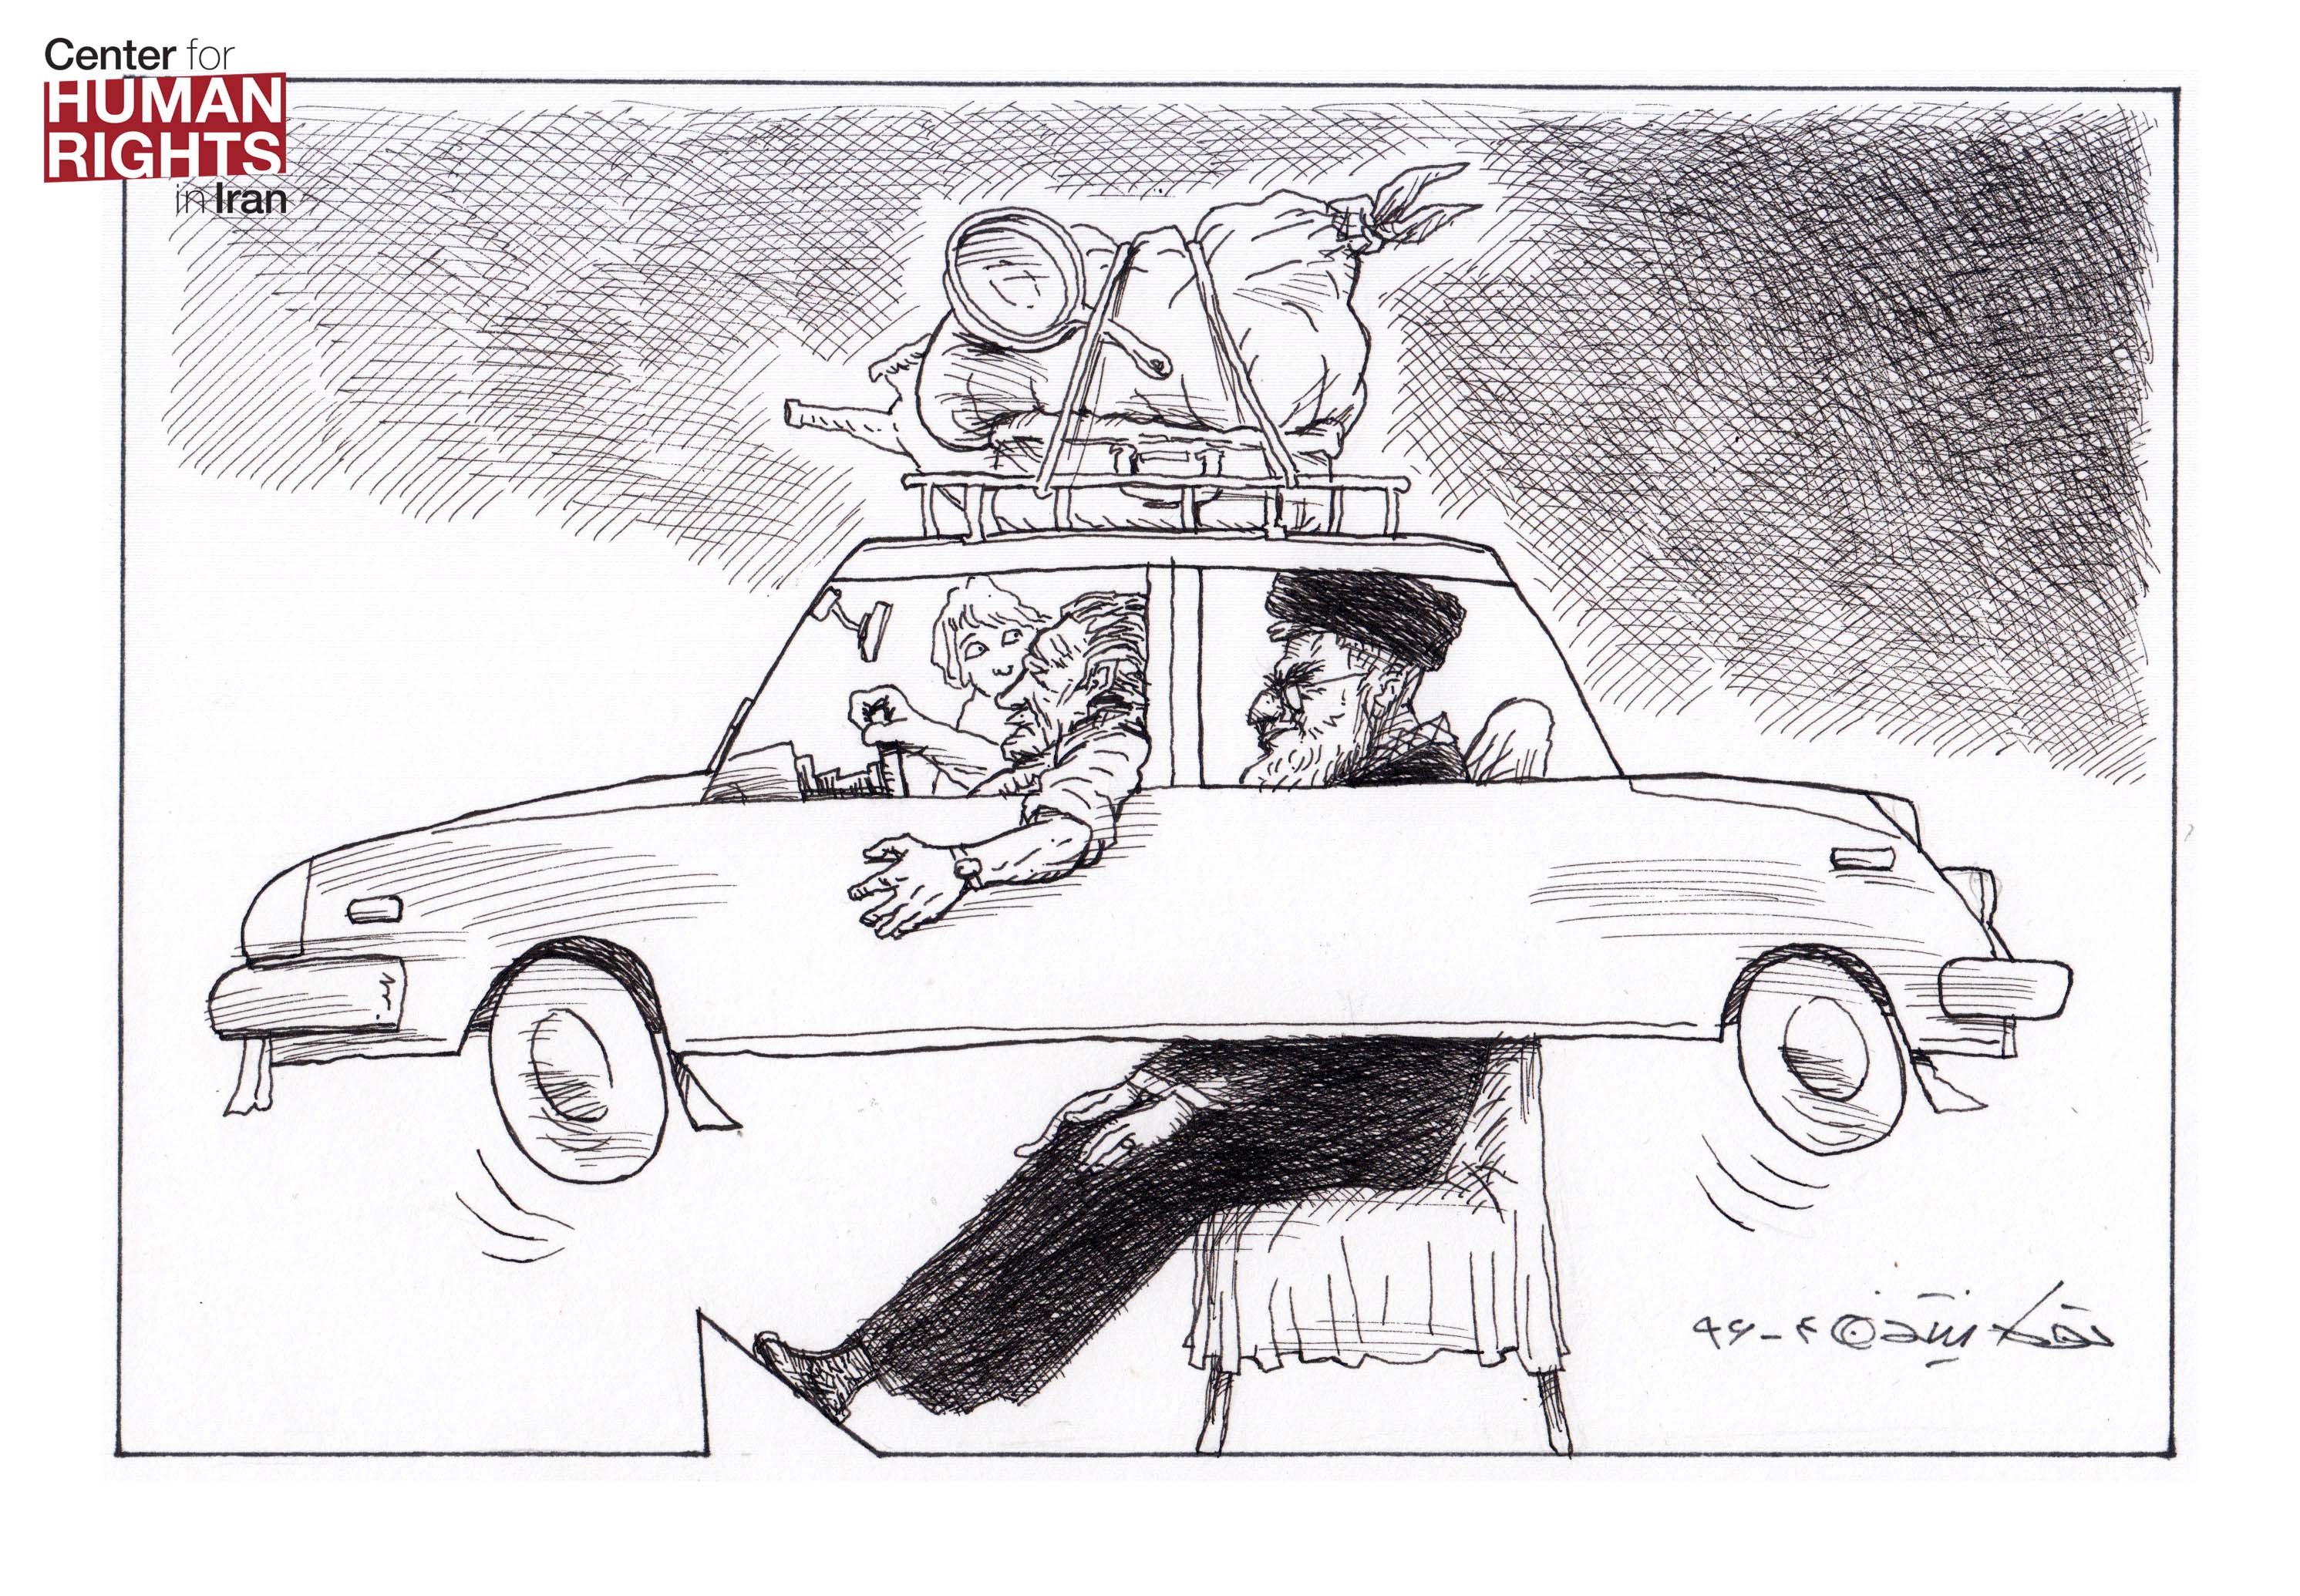 Cartoonist Touka Neyastani depicts the debate over whether women should be forced to wear hijabs in cars, which legal experts argue are private spaces and therefore not subject to Iran's mandatory hijab law. https://www.iranhumanrights.org/2017/07/contradictory-laws-exasperate-debate-over-iranian-womens-observance-of-hijab-in-cars/